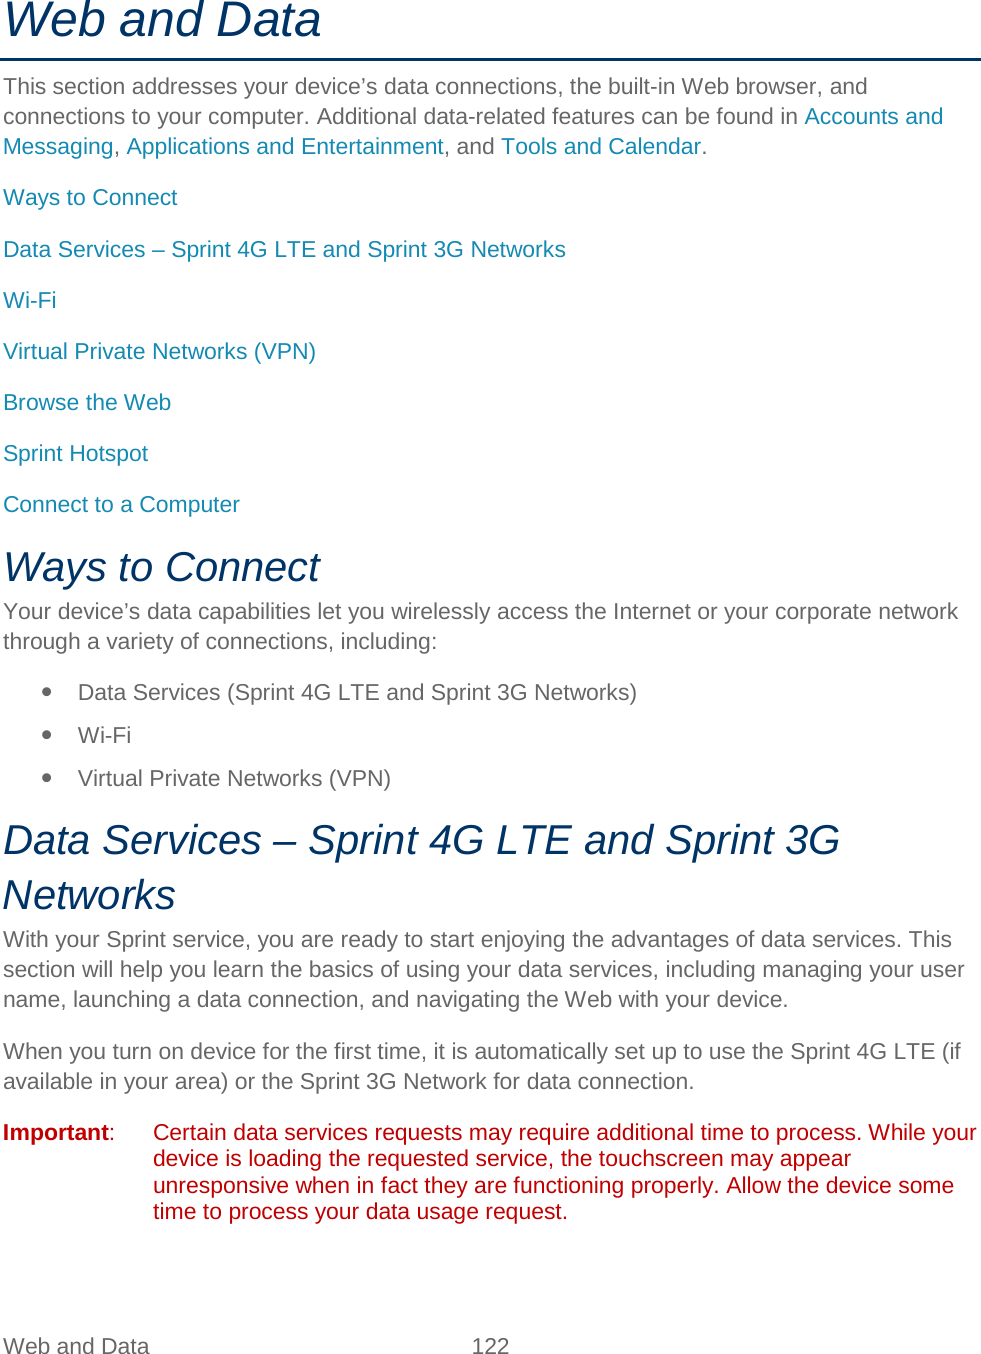  Web and Data 122   Web and Data This section addresses your device’s data connections, the built-in Web browser, and connections to your computer. Additional data-related features can be found in Accounts and Messaging, Applications and Entertainment, and Tools and Calendar. Ways to Connect Data Services – Sprint 4G LTE and Sprint 3G Networks Wi-Fi Virtual Private Networks (VPN) Browse the Web Sprint Hotspot Connect to a Computer Ways to Connect Your device’s data capabilities let you wirelessly access the Internet or your corporate network through a variety of connections, including:  Data Services (Sprint 4G LTE and Sprint 3G Networks)  Wi-Fi  Virtual Private Networks (VPN) Data Services – Sprint 4G LTE and Sprint 3G Networks With your Sprint service, you are ready to start enjoying the advantages of data services. This section will help you learn the basics of using your data services, including managing your user name, launching a data connection, and navigating the Web with your device. When you turn on device for the first time, it is automatically set up to use the Sprint 4G LTE (if available in your area) or the Sprint 3G Network for data connection. Important:  Certain data services requests may require additional time to process. While your device is loading the requested service, the touchscreen may appear unresponsive when in fact they are functioning properly. Allow the device some time to process your data usage request. 